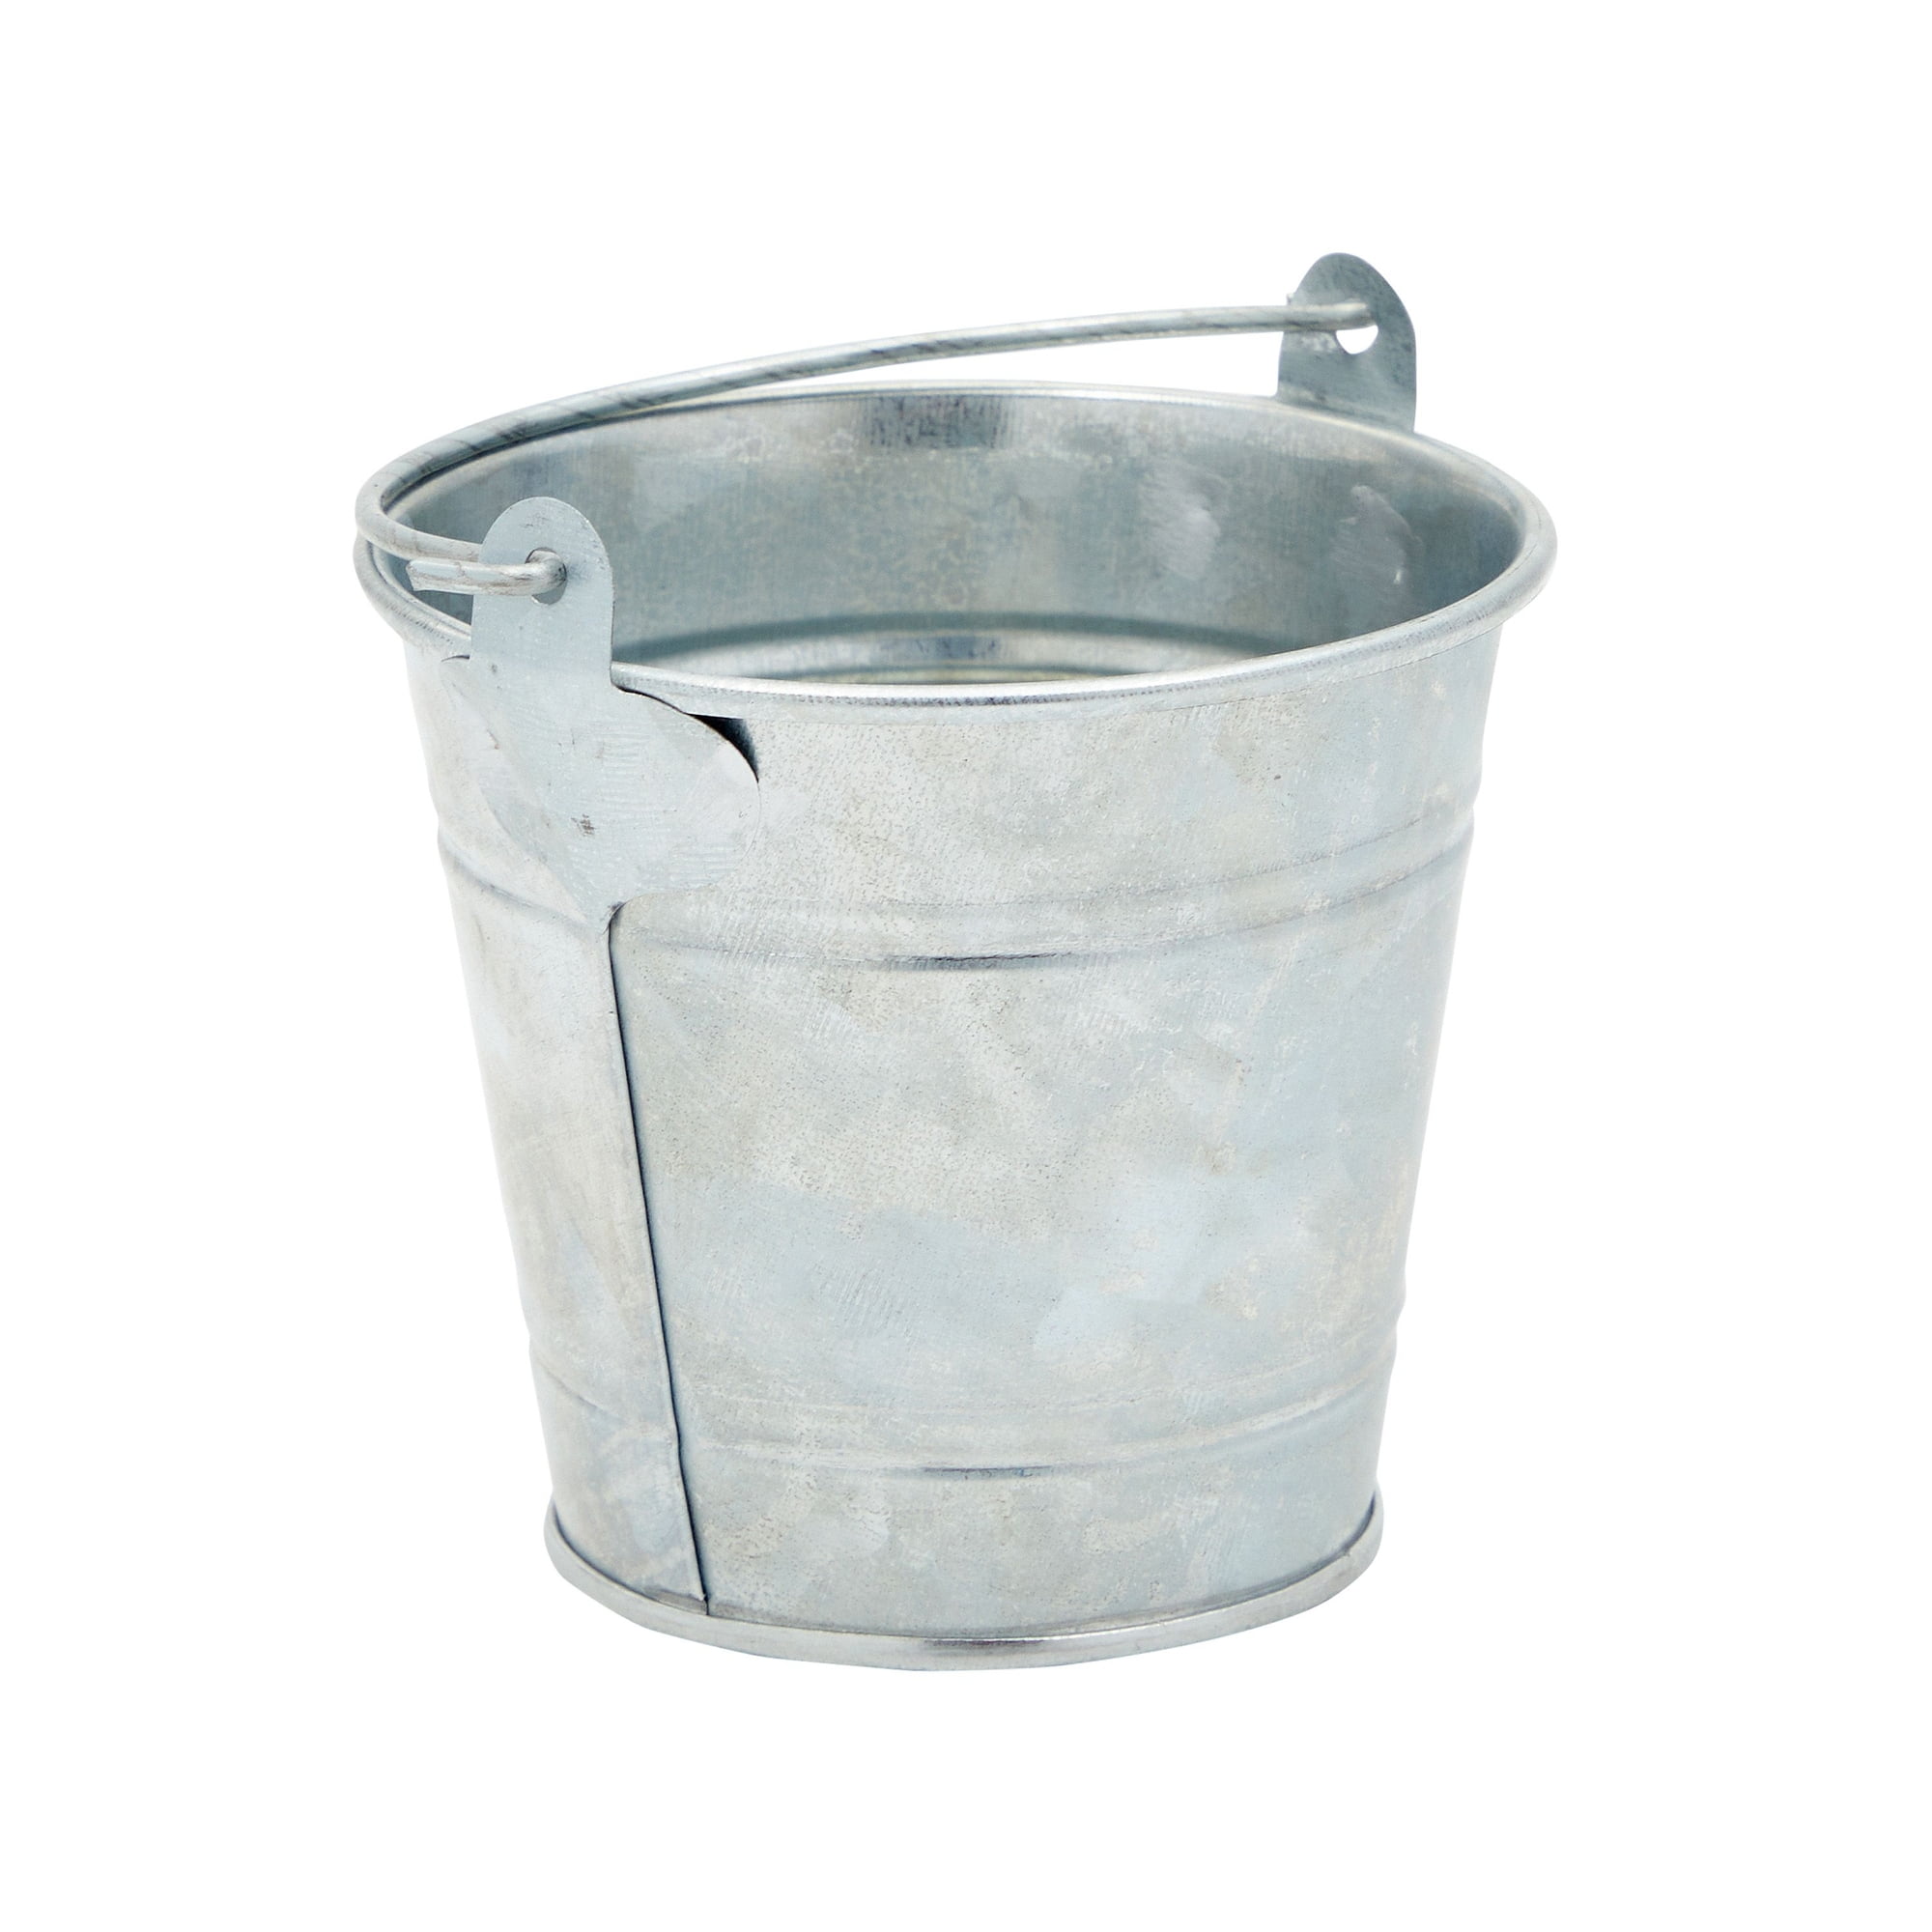 Tiny Galvanized Bucket 3.5 with Handles and Liner - Candles4Less